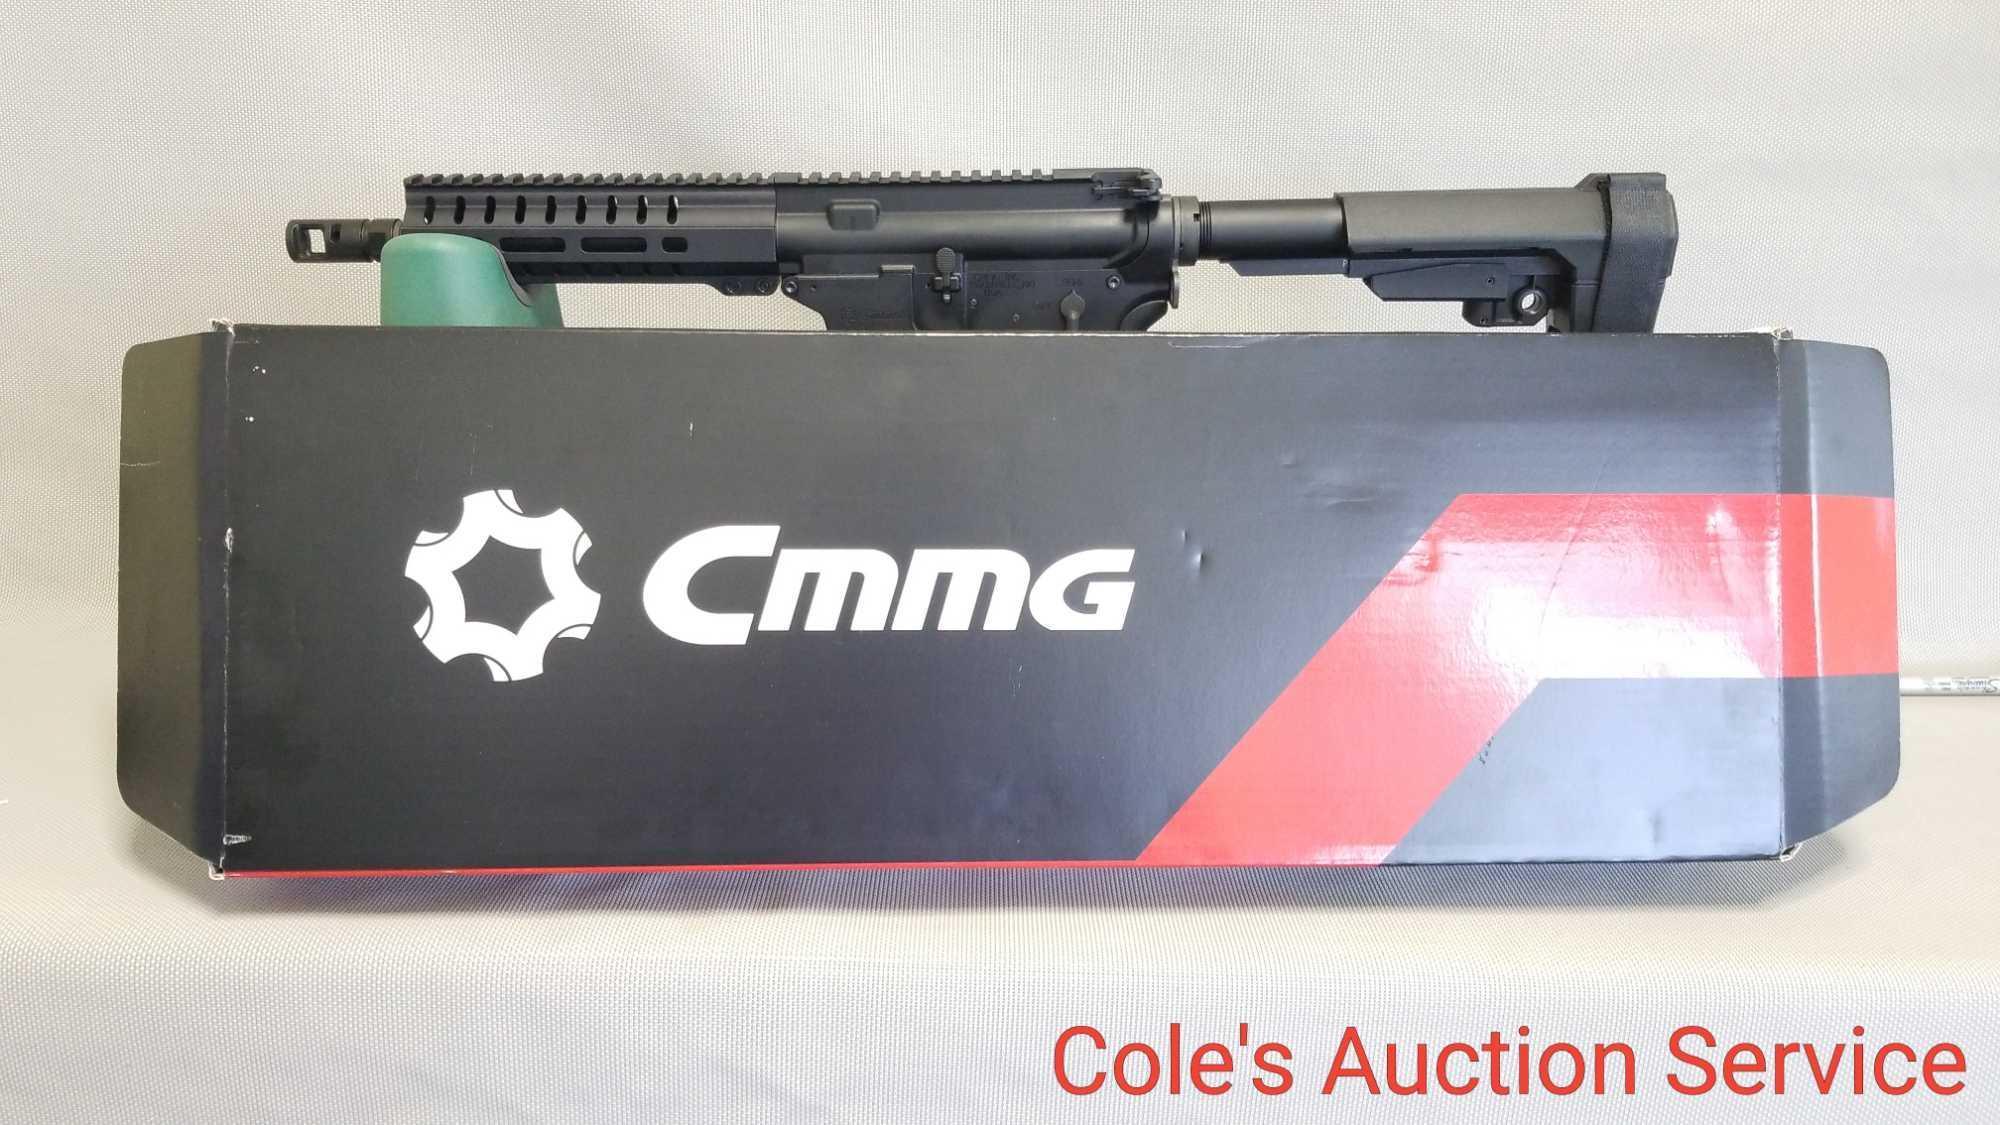 Cmmg model mk57 assault gun. 5.7 x28 caliber. Includes 4 magazines. Appears to be brand new in box.